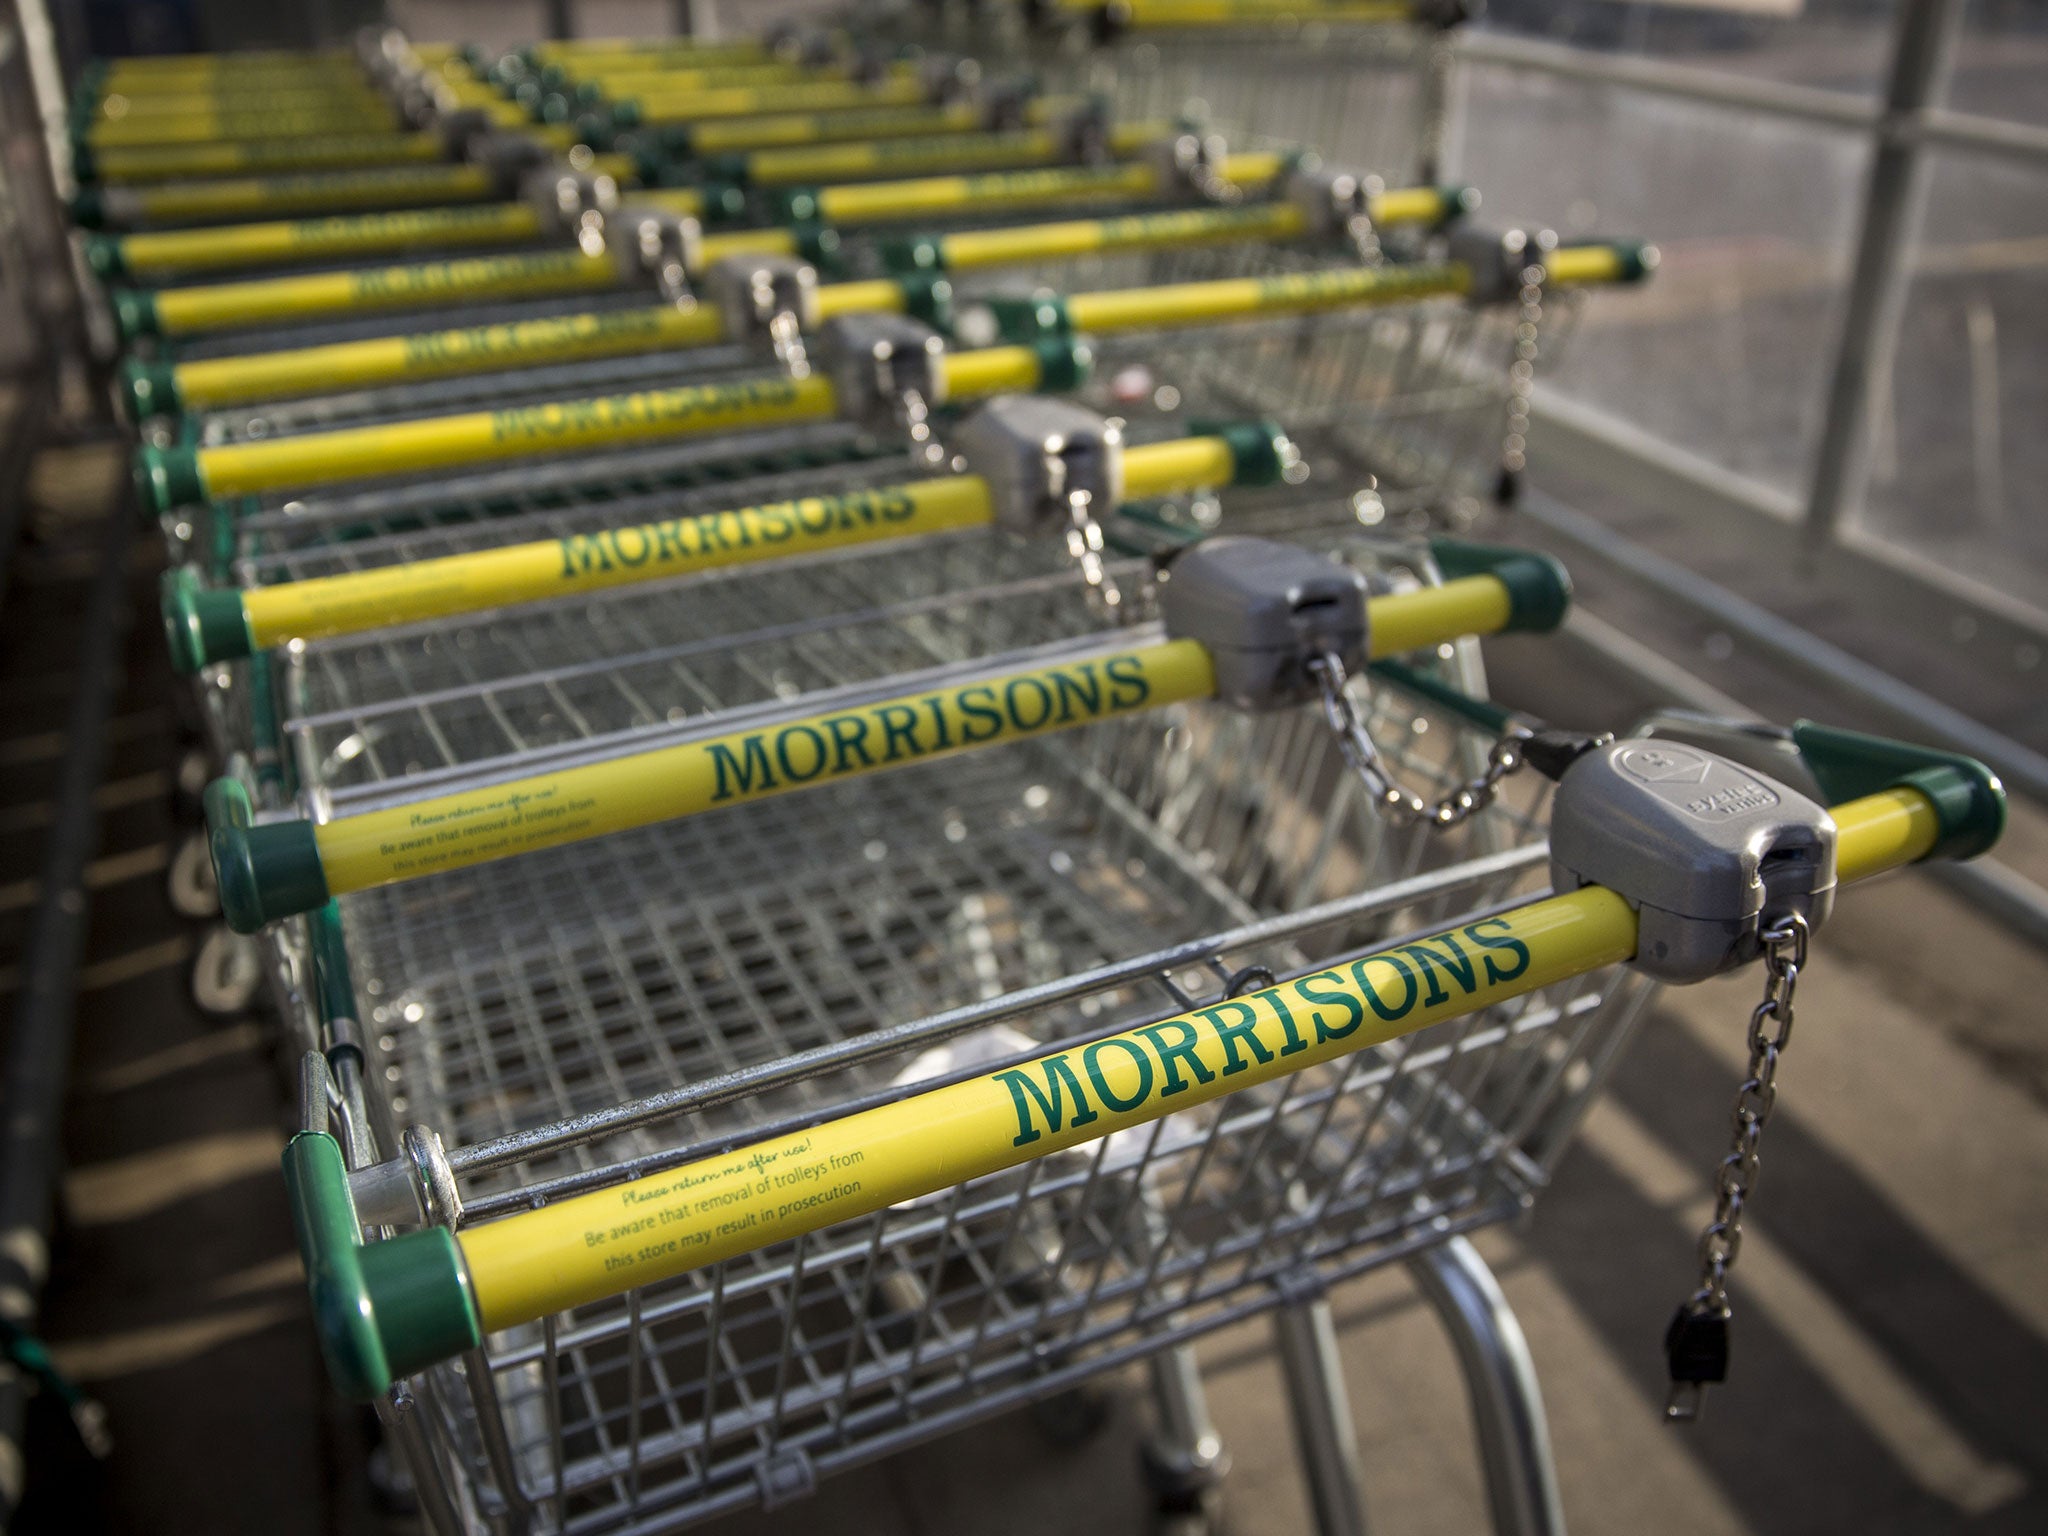 Morrisons has retreated from its costly move into the convenience store market